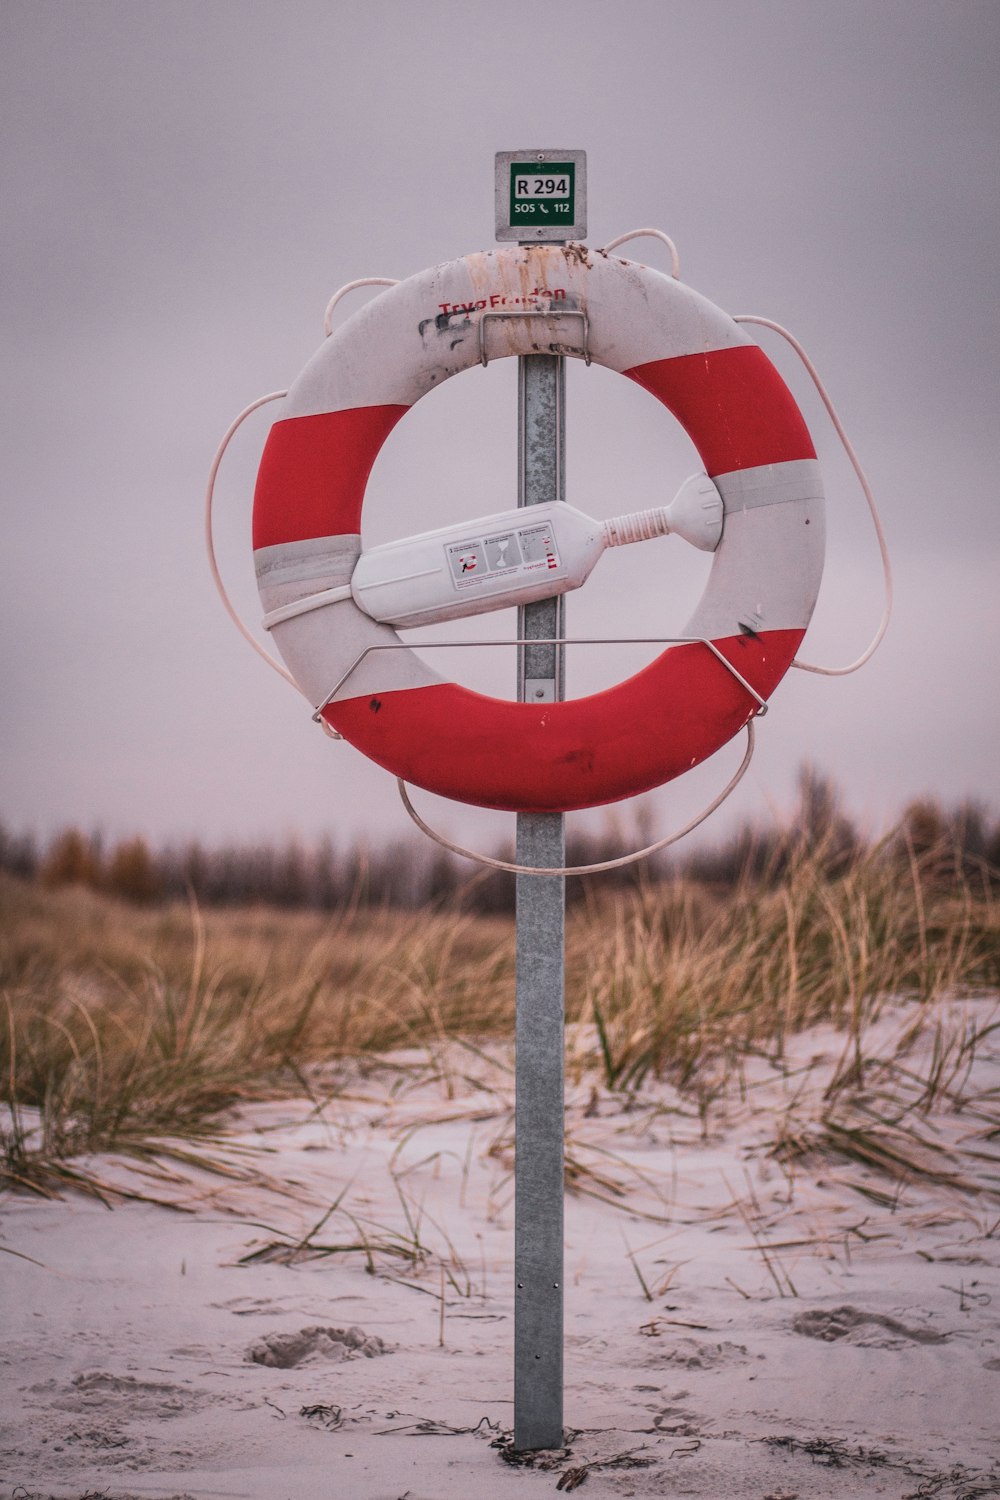 a life preserver sitting on top of a metal pole